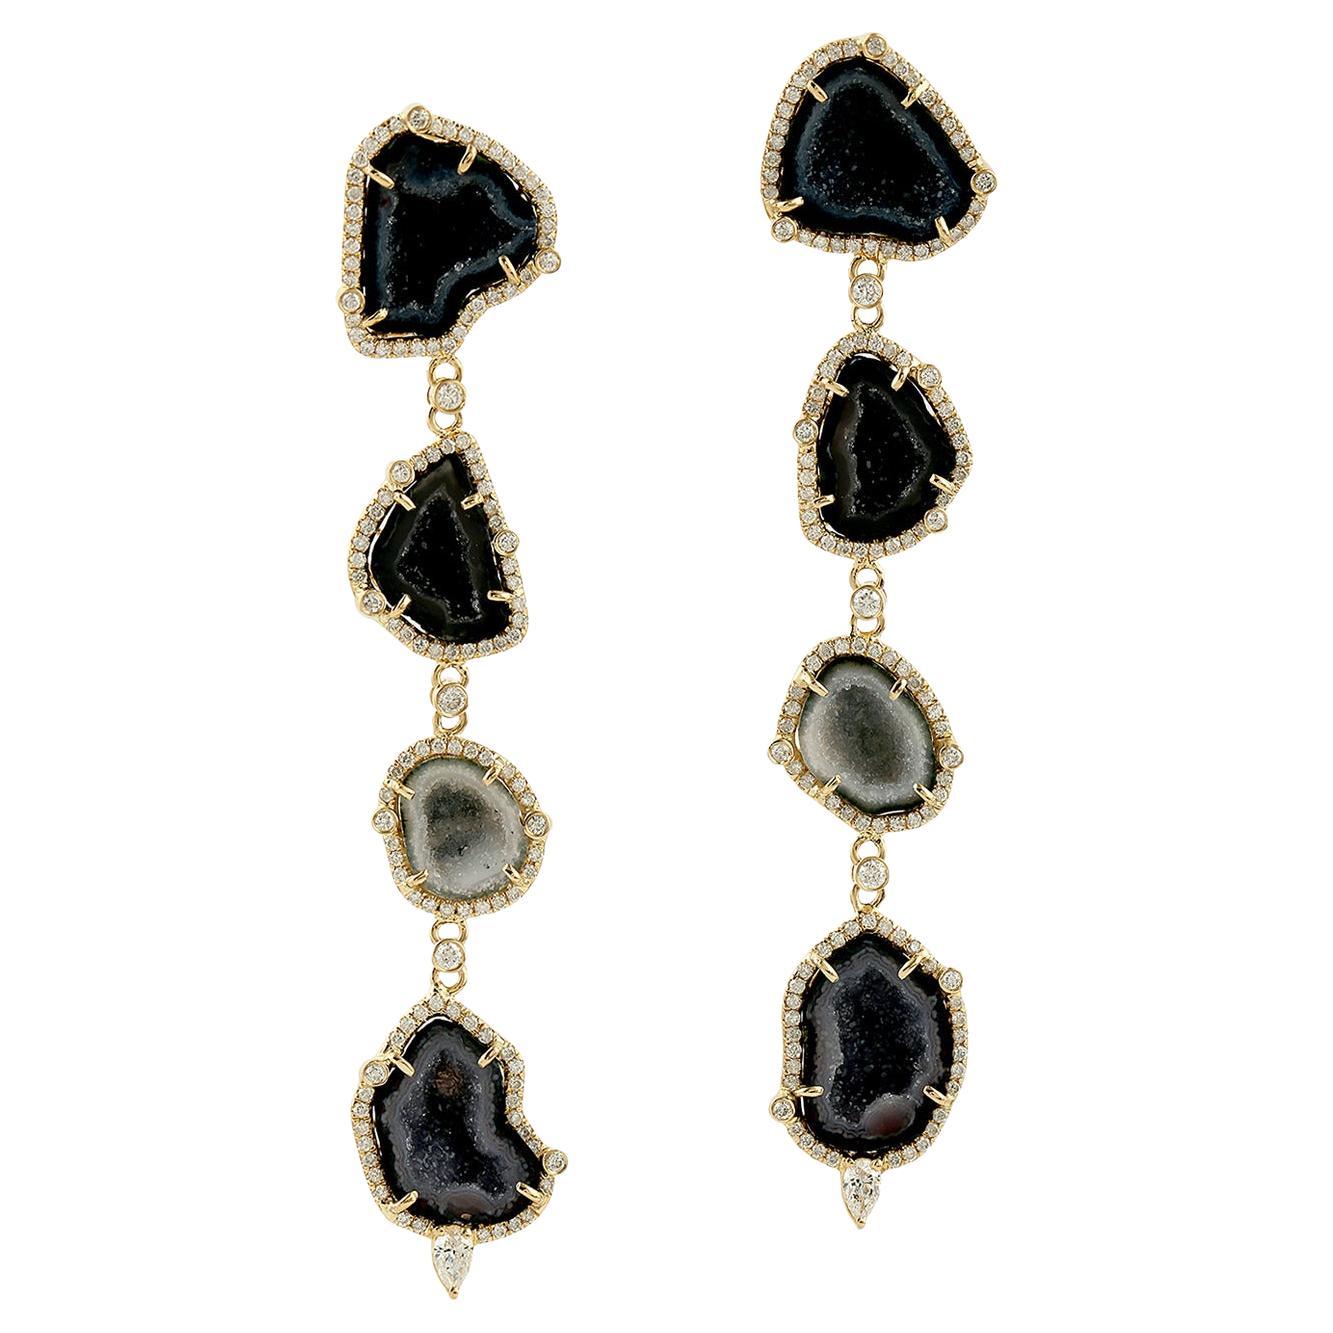 Multi Tier Sliced Geode Dangle Earrings With Diamonds Made In 18k yellow Gold For Sale